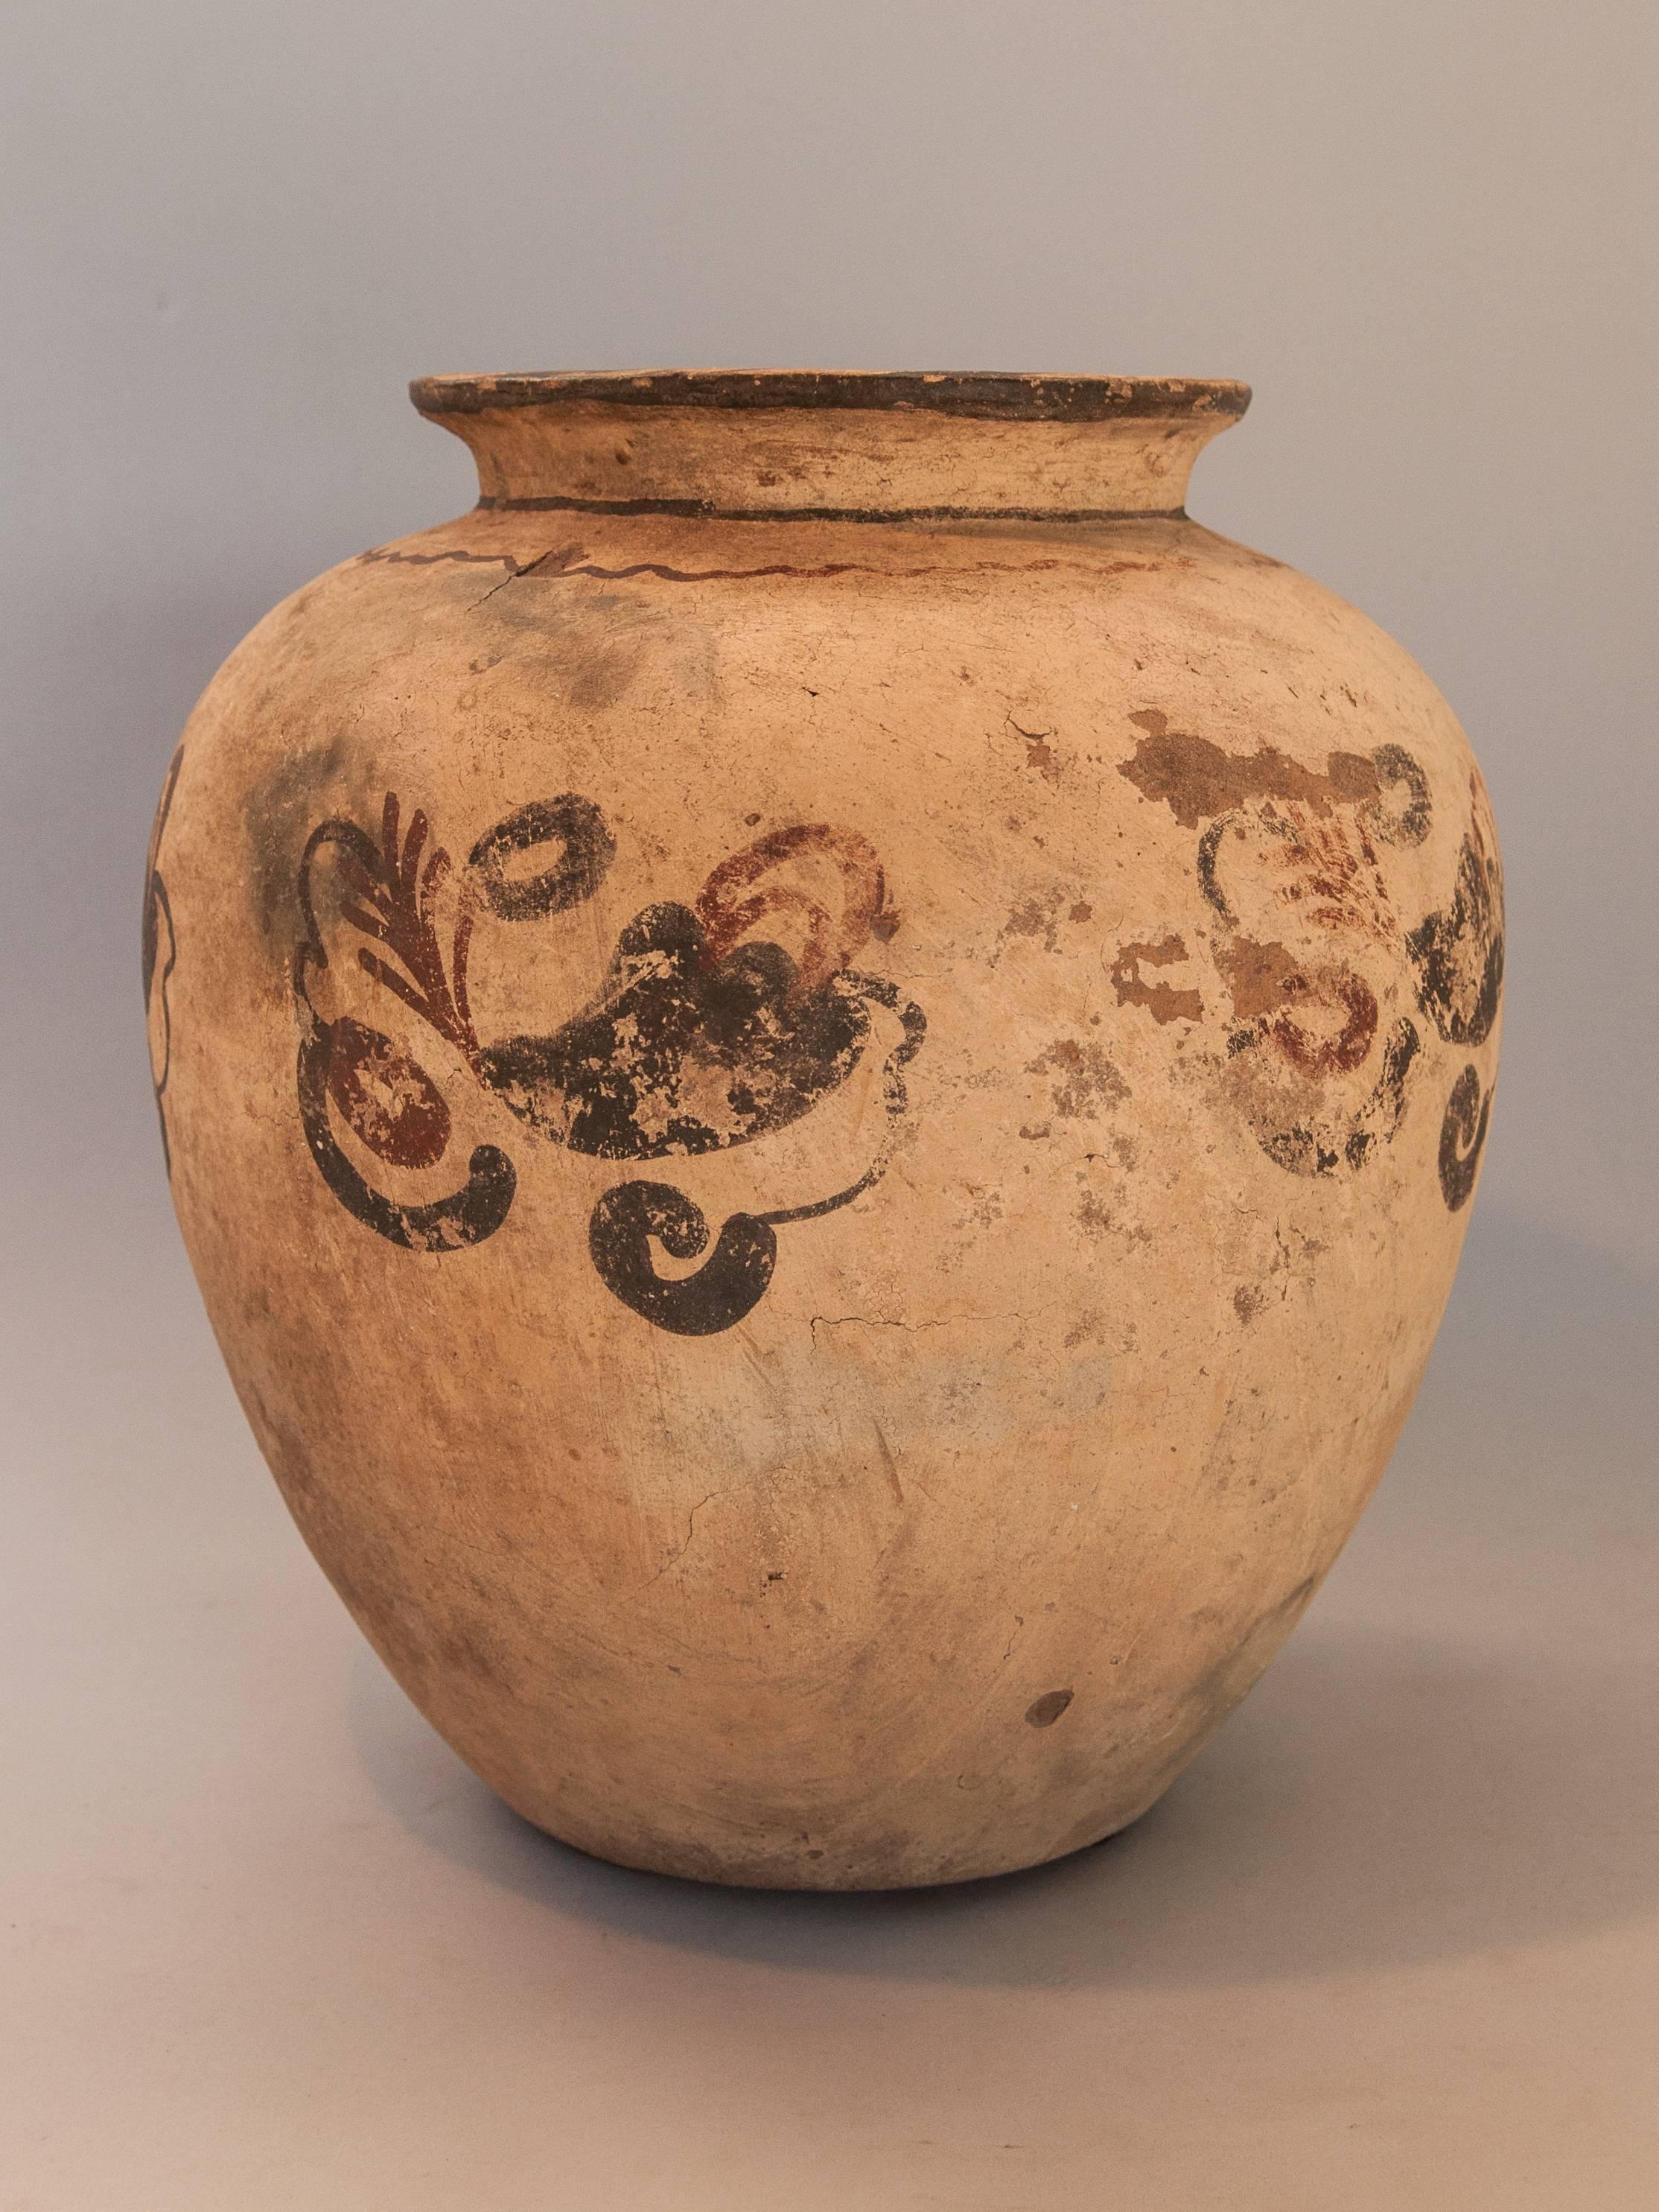 Earthenware Pot with Floral Design Mid-20th Century. Molucca Islands, Indonesia
This low fired earthenware pot is from the Southeast Molucca Islands, most probably from Kei. It is formed by hand, not thrown, using the fist and palm to achieve its